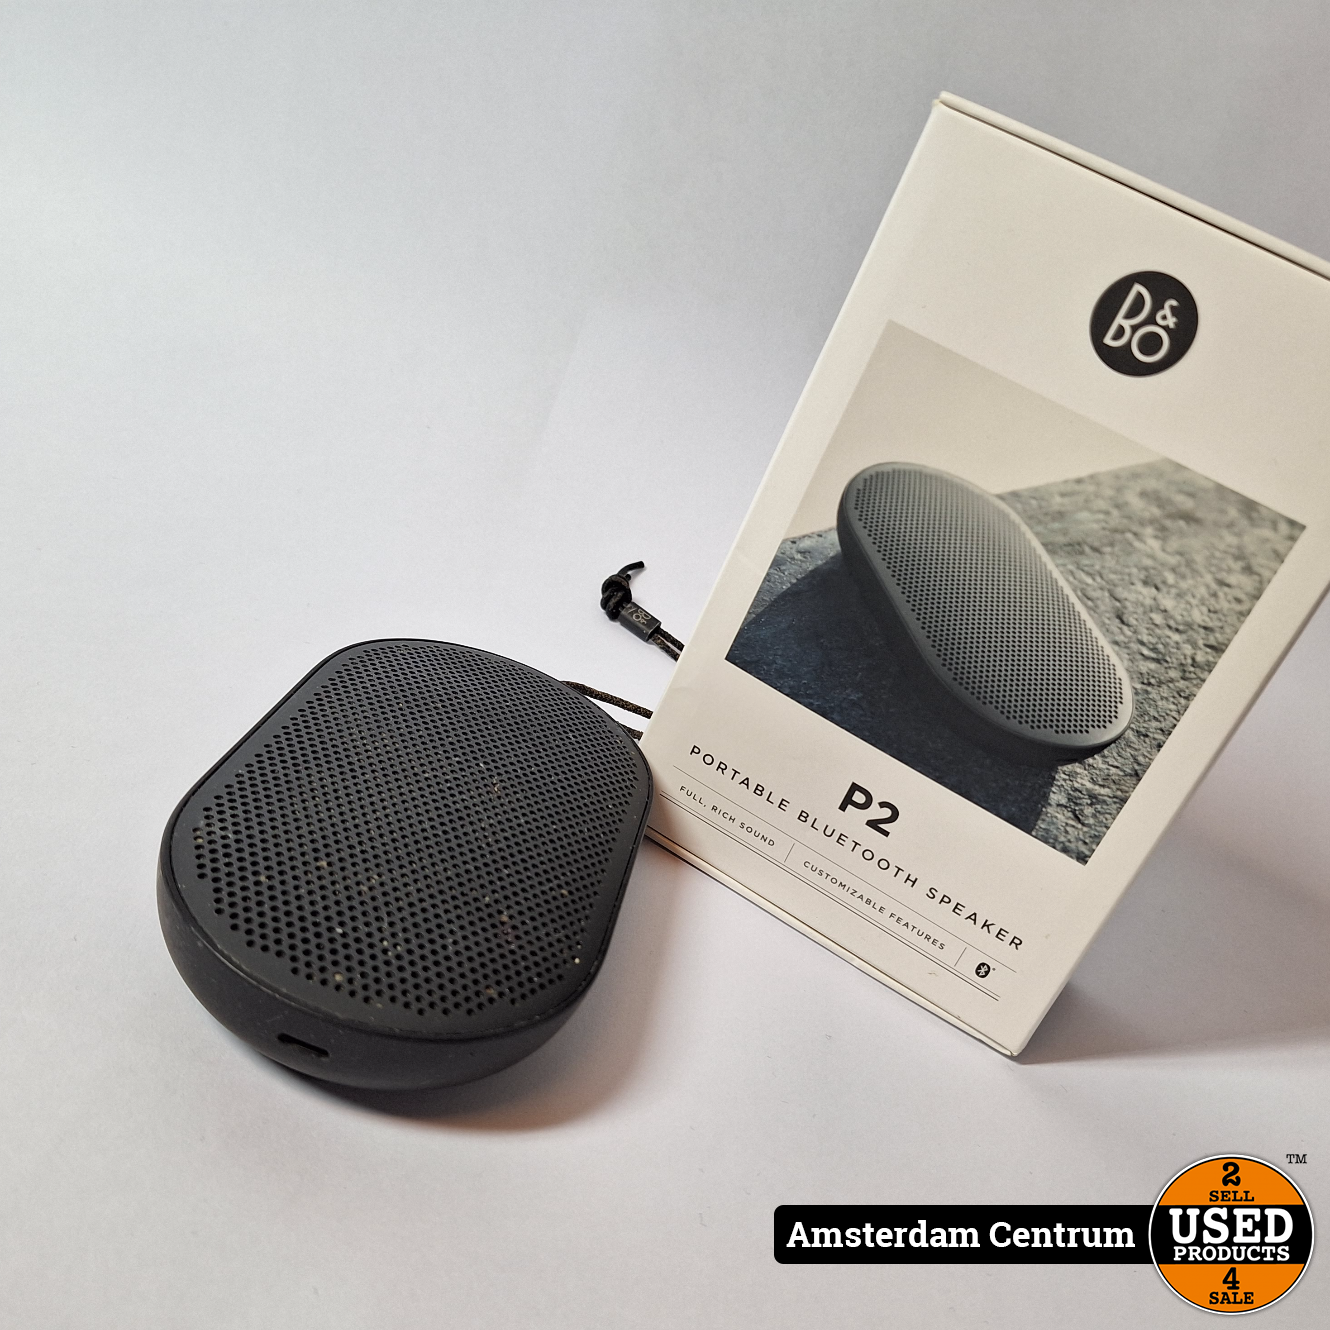 Bang Beoplay P2 Draadloze Speaker - Incl. Garantie - Used Products Amsterdam Centrum